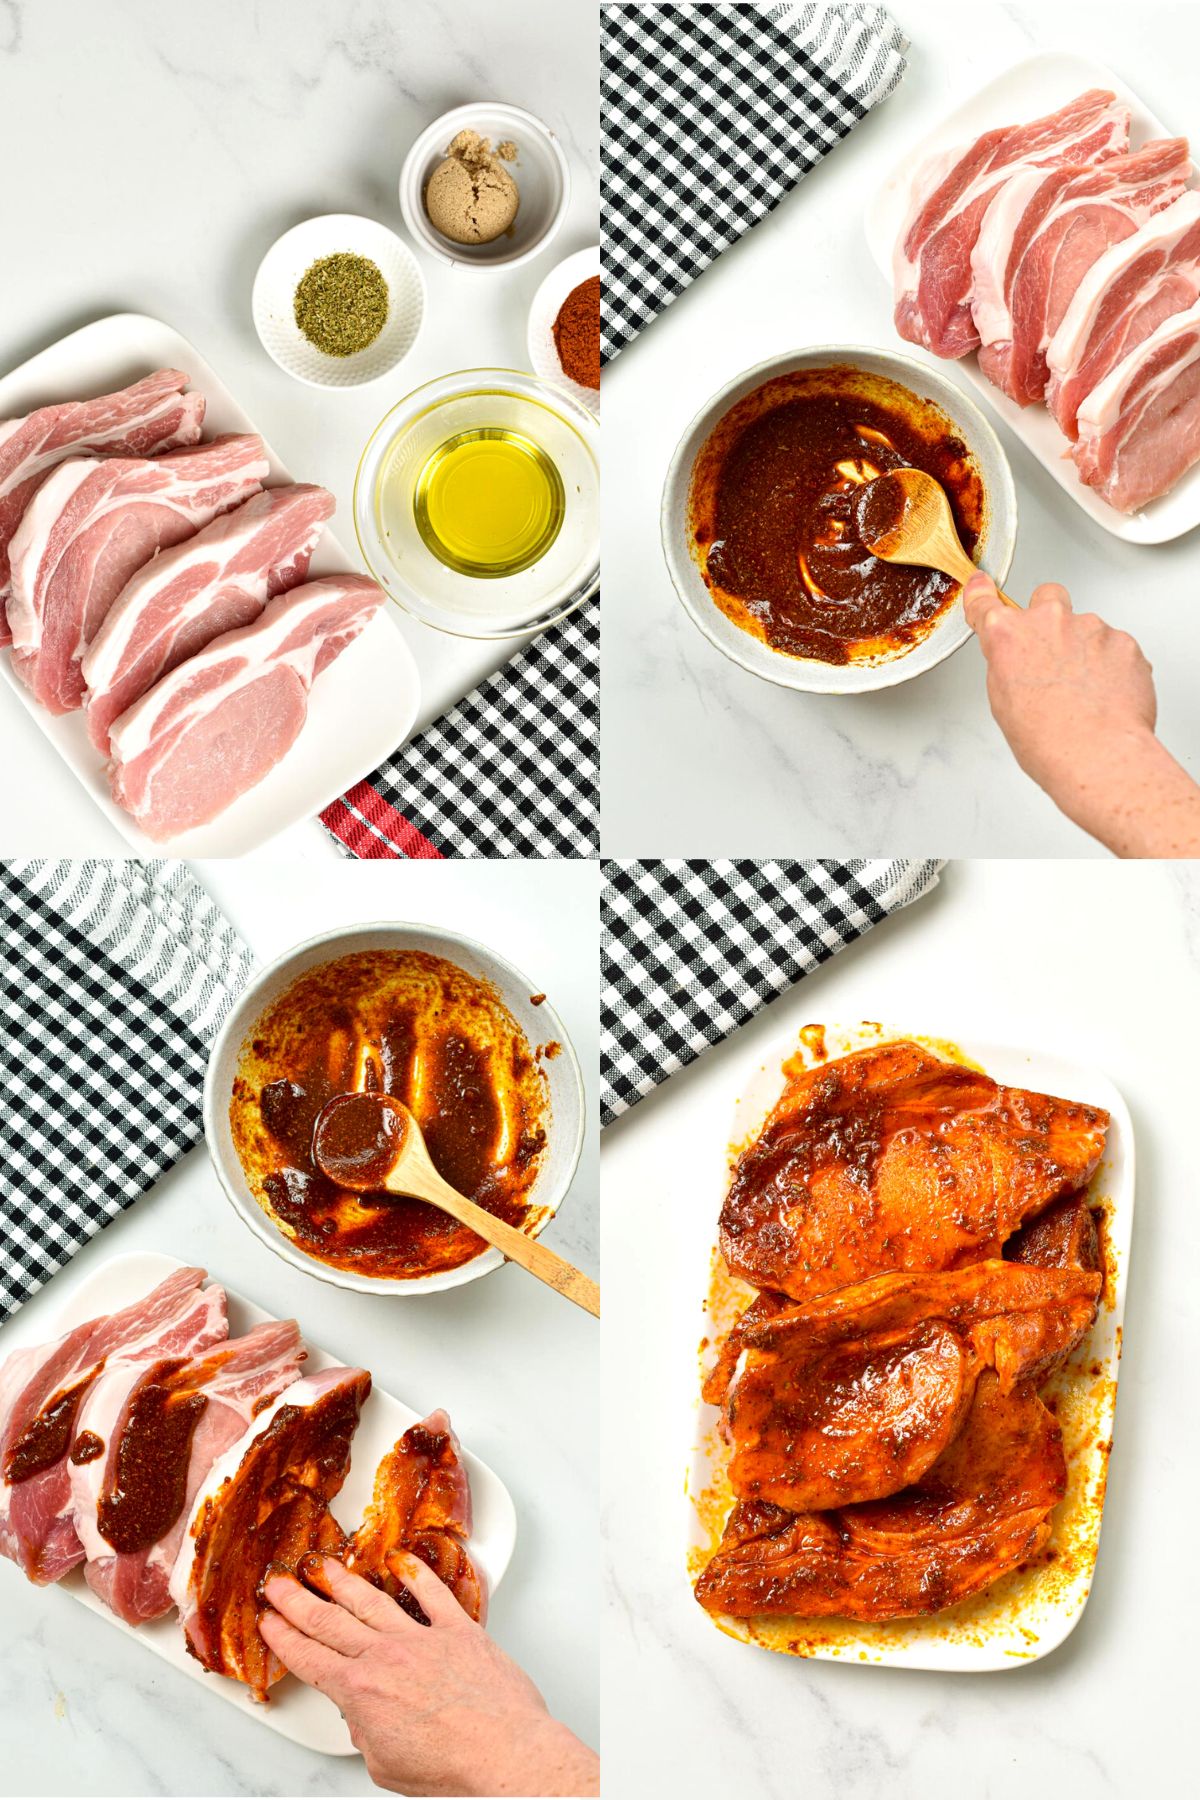 Step-by-step instructions on how to make 4-ingredient Oven Baked Pork Chops.